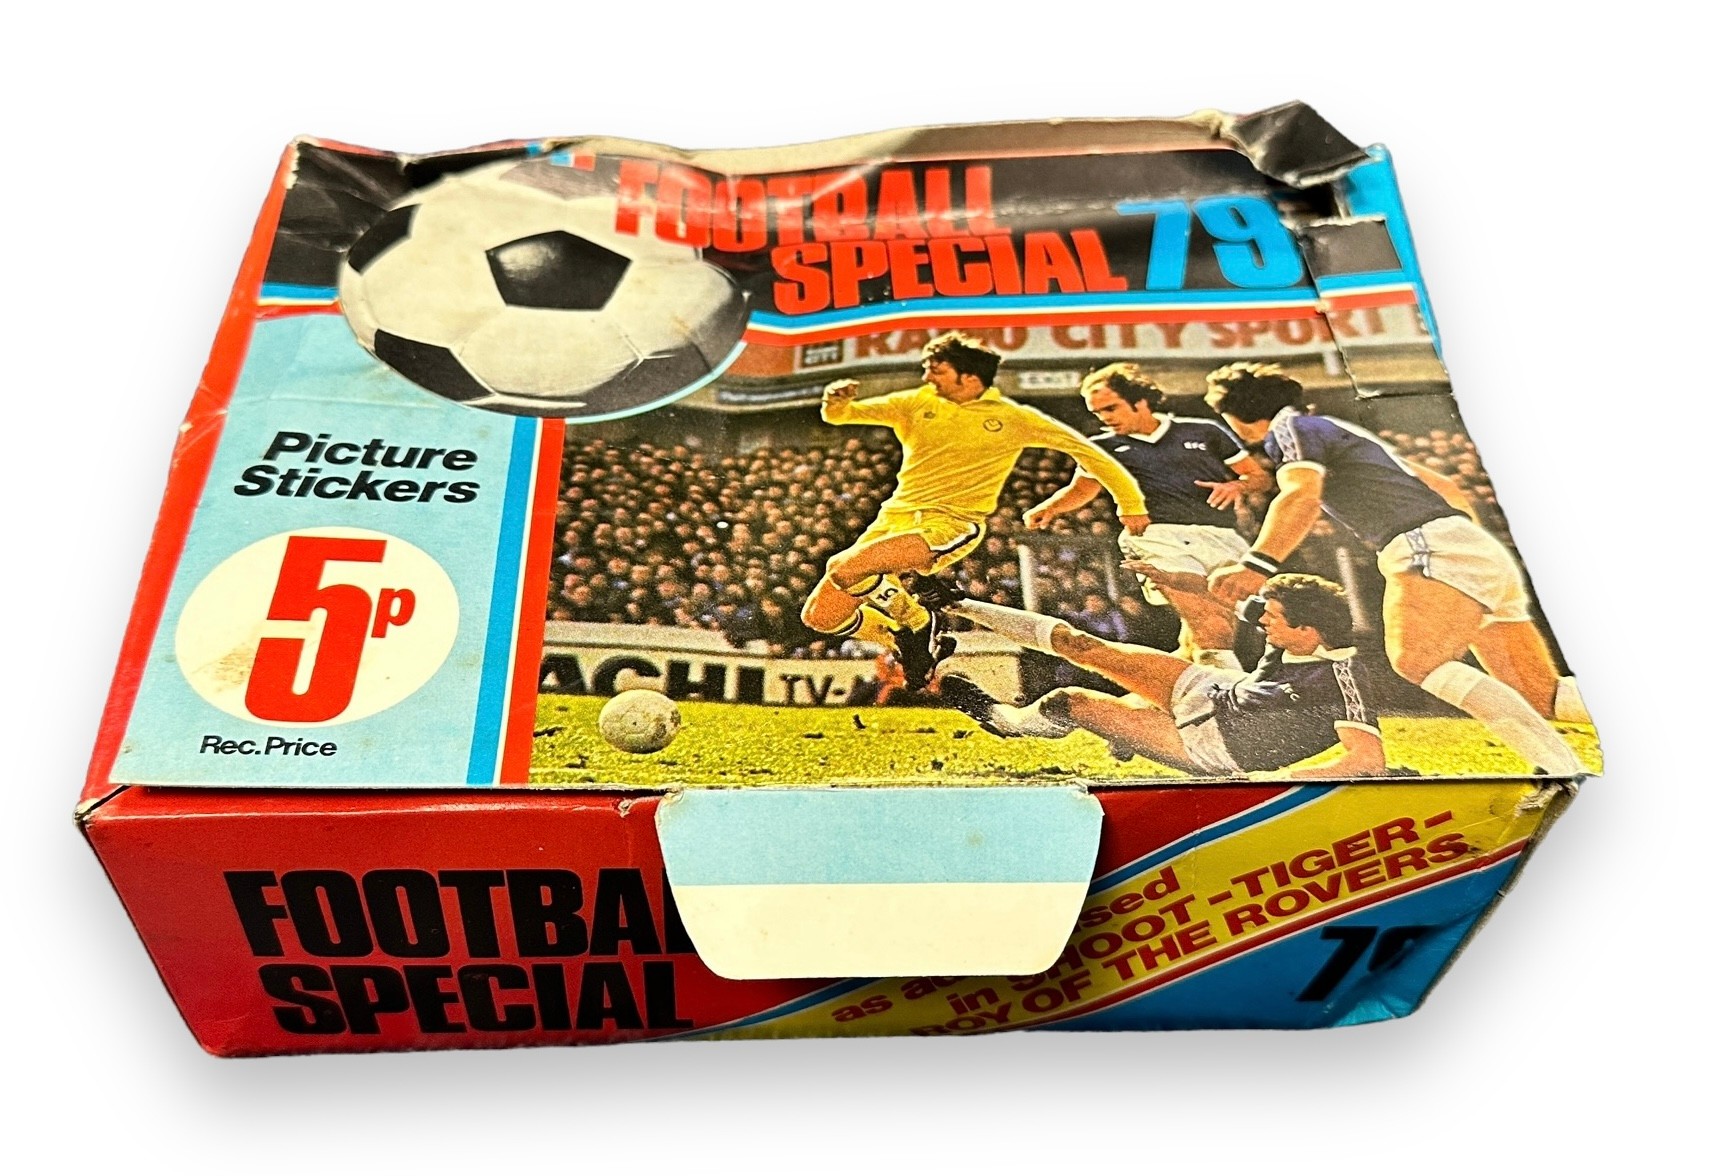 Trade stickers, Americana, 'Football Special 79', Counter Display Box containing approx. 200 packets - Image 2 of 4